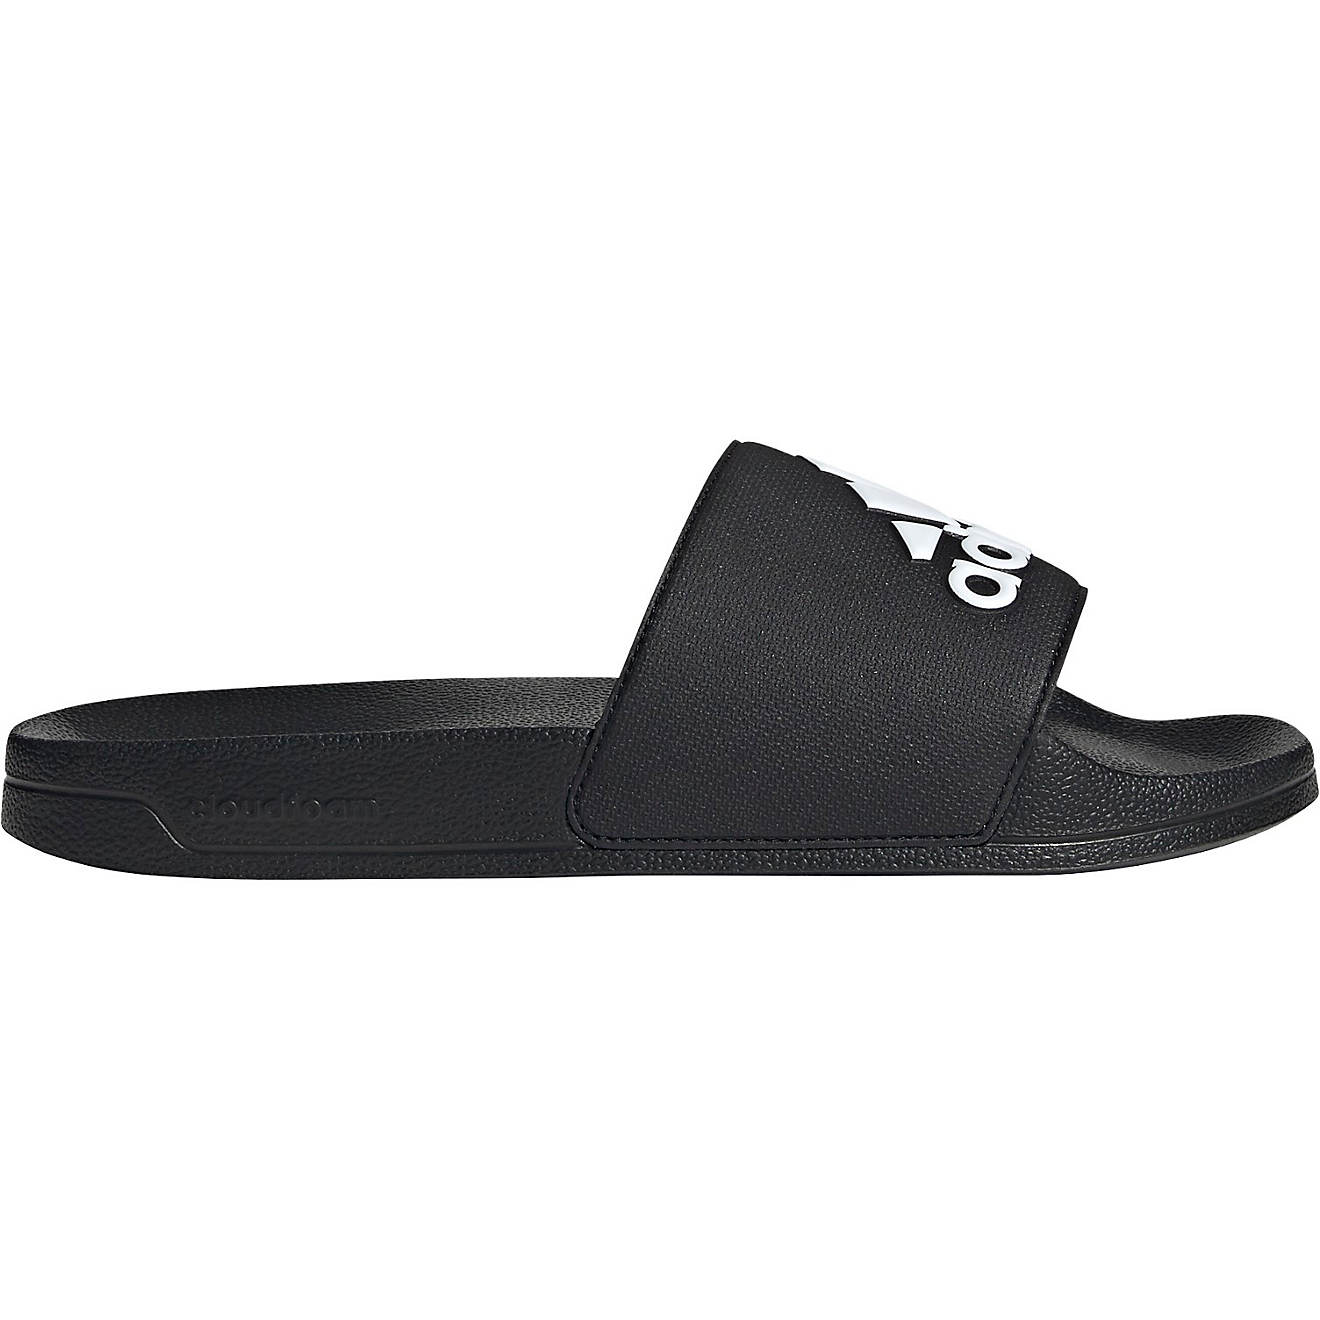 Men's and Women's Slide Sandals: adidas Adilette 2 for $22.50 ($11.25 each) , adidas Alphabounce Slides 2 for $37.50 ($18.75 each),  More + free shipping on $25